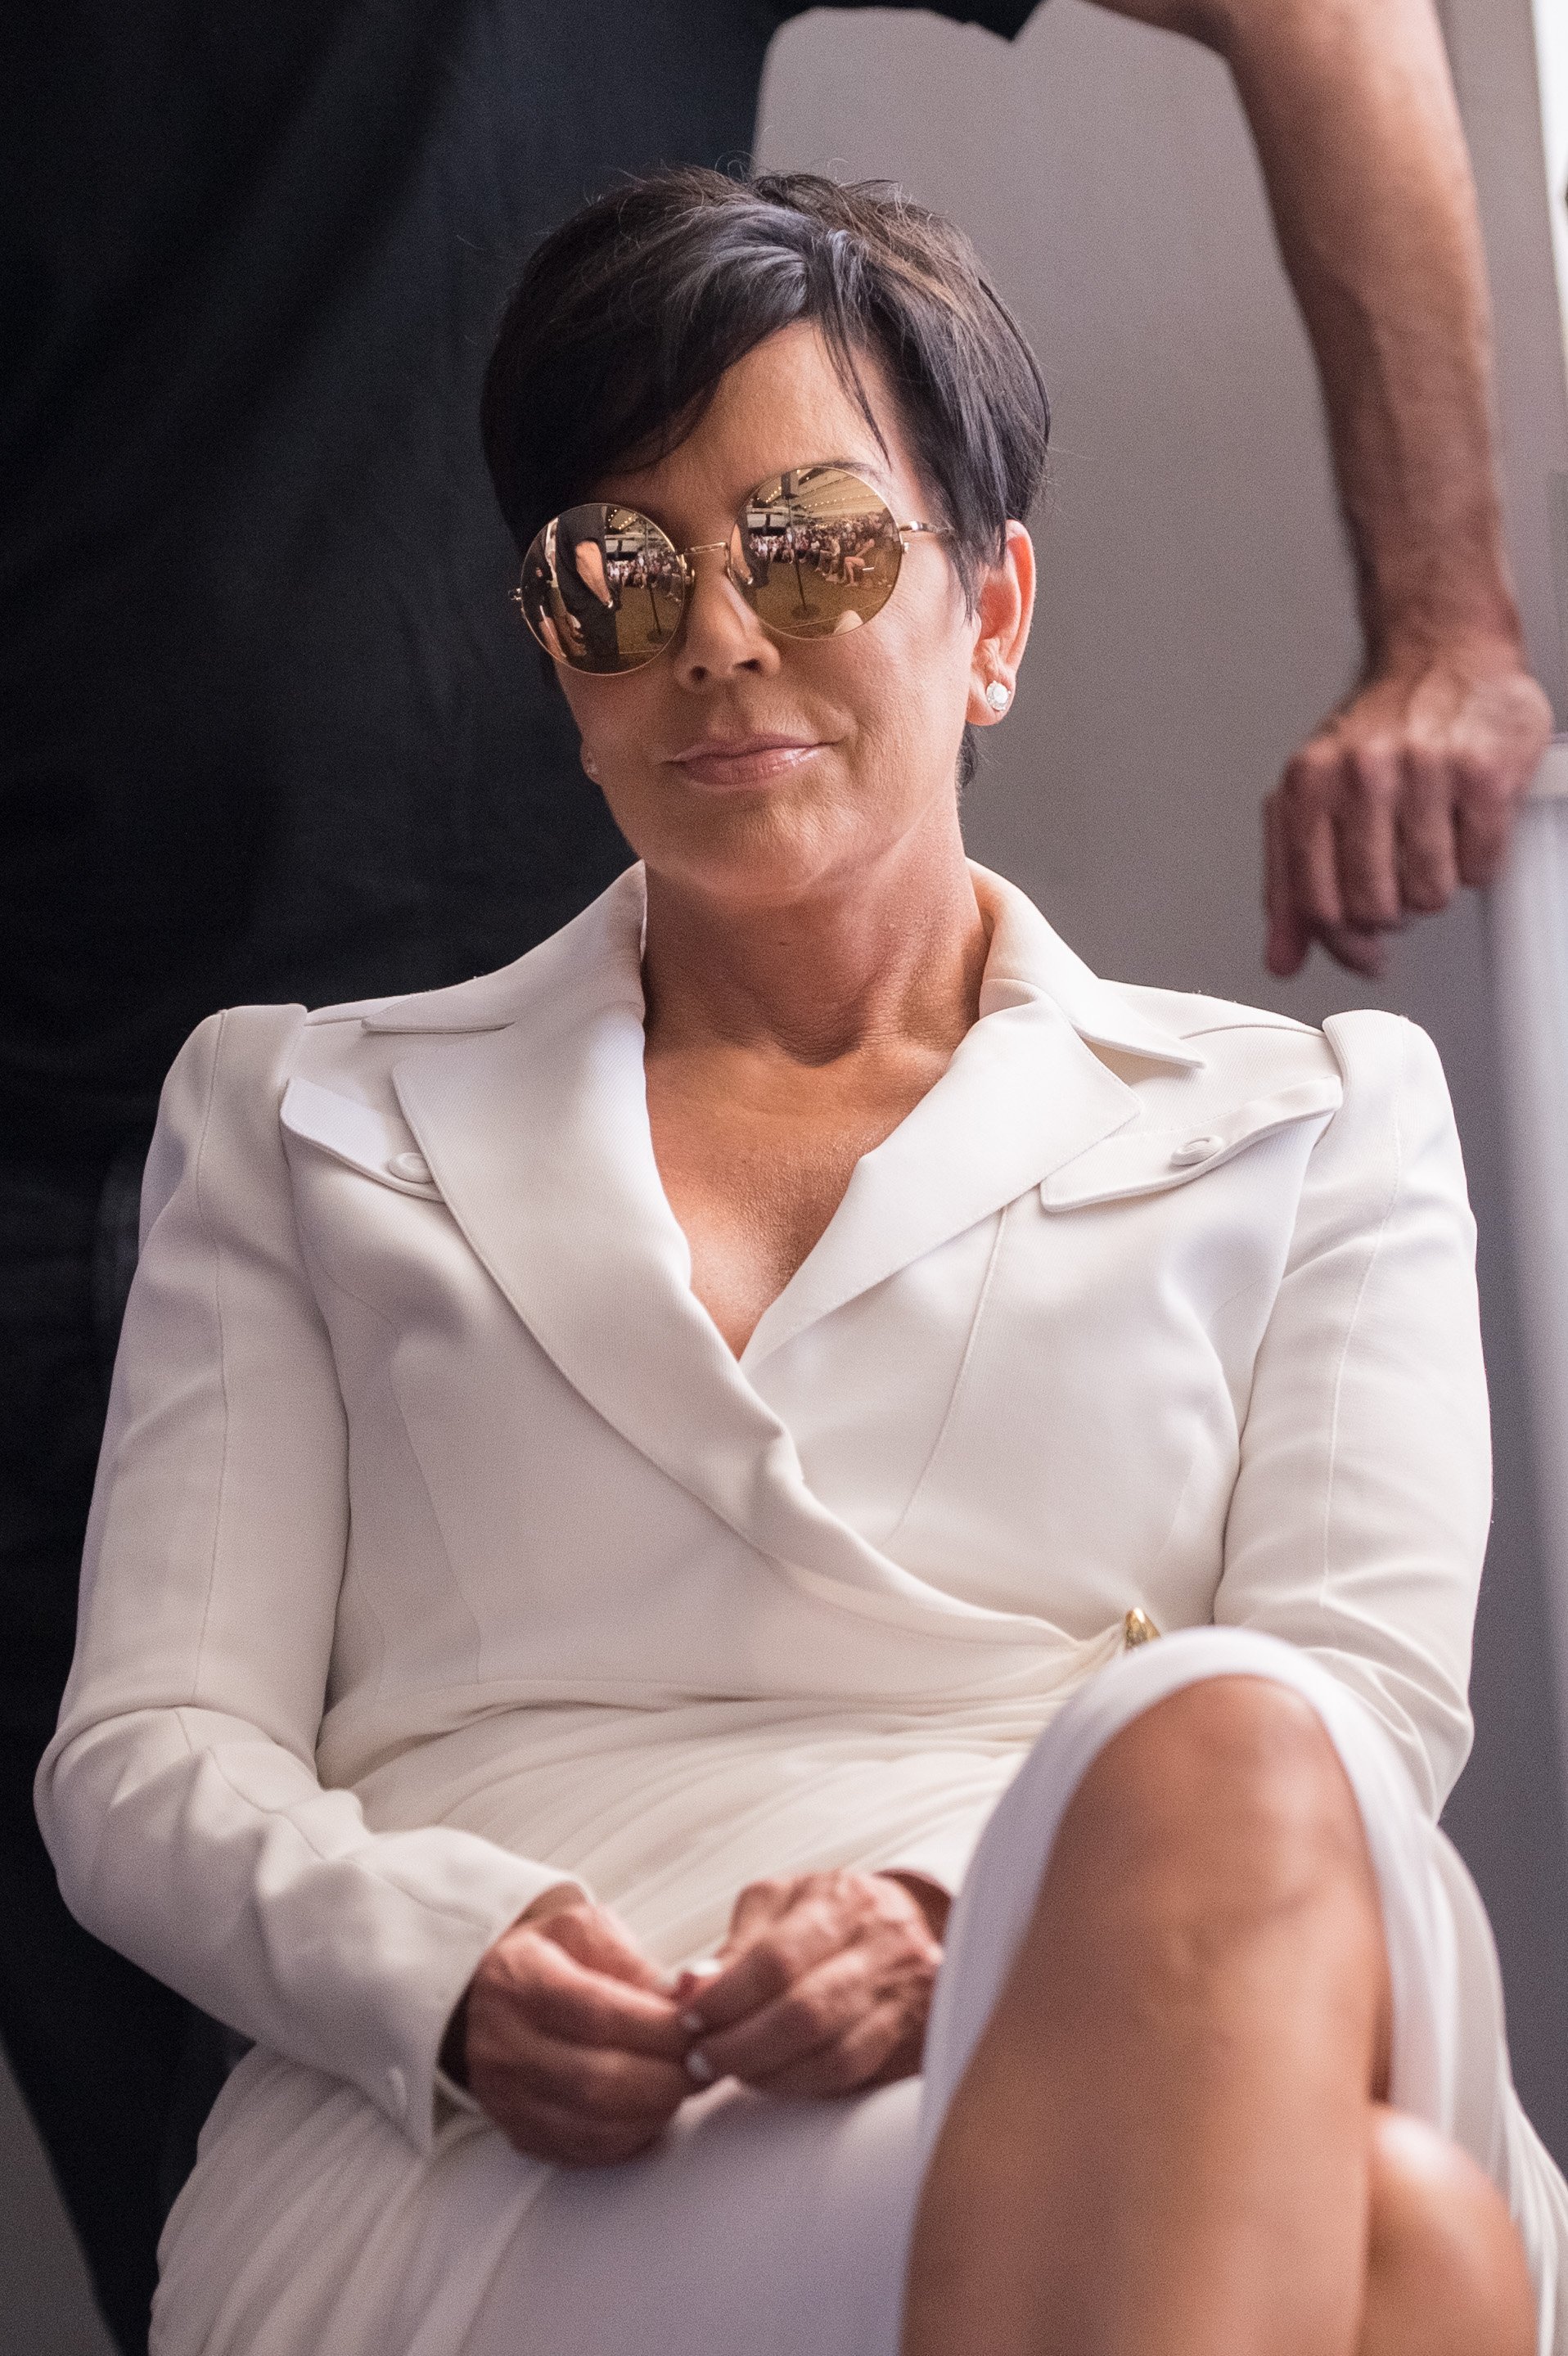 Kris Jenner at a talk during the Cannes Lions International Festival in June 2015. | Photo: Getty Images